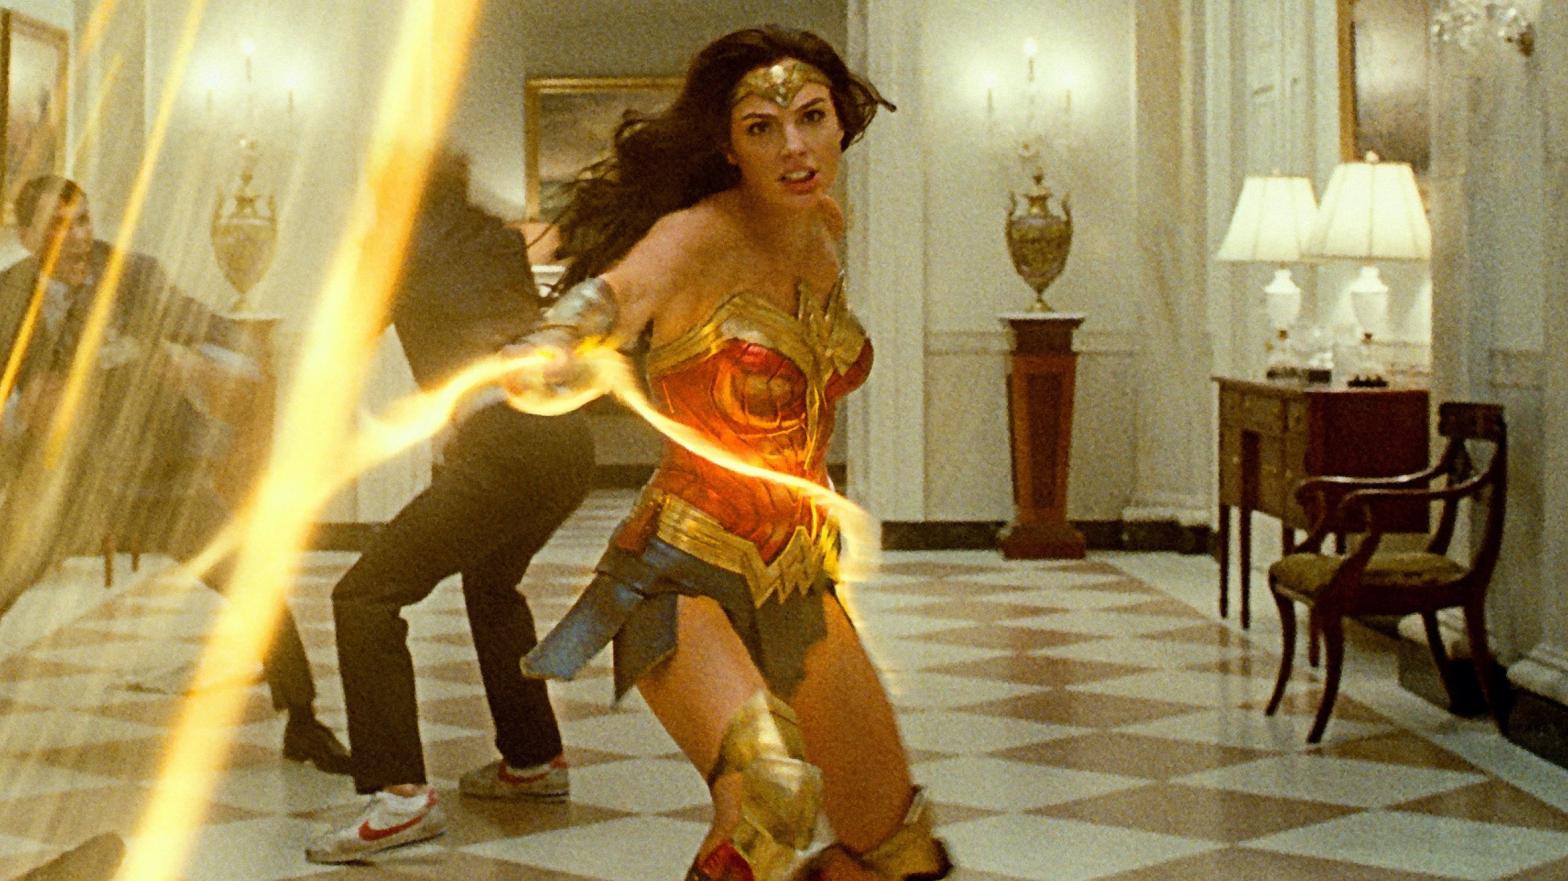 Wonder Woman 1984 will debut on streaming the same day as theatres. (Photo: Warner Bros.)